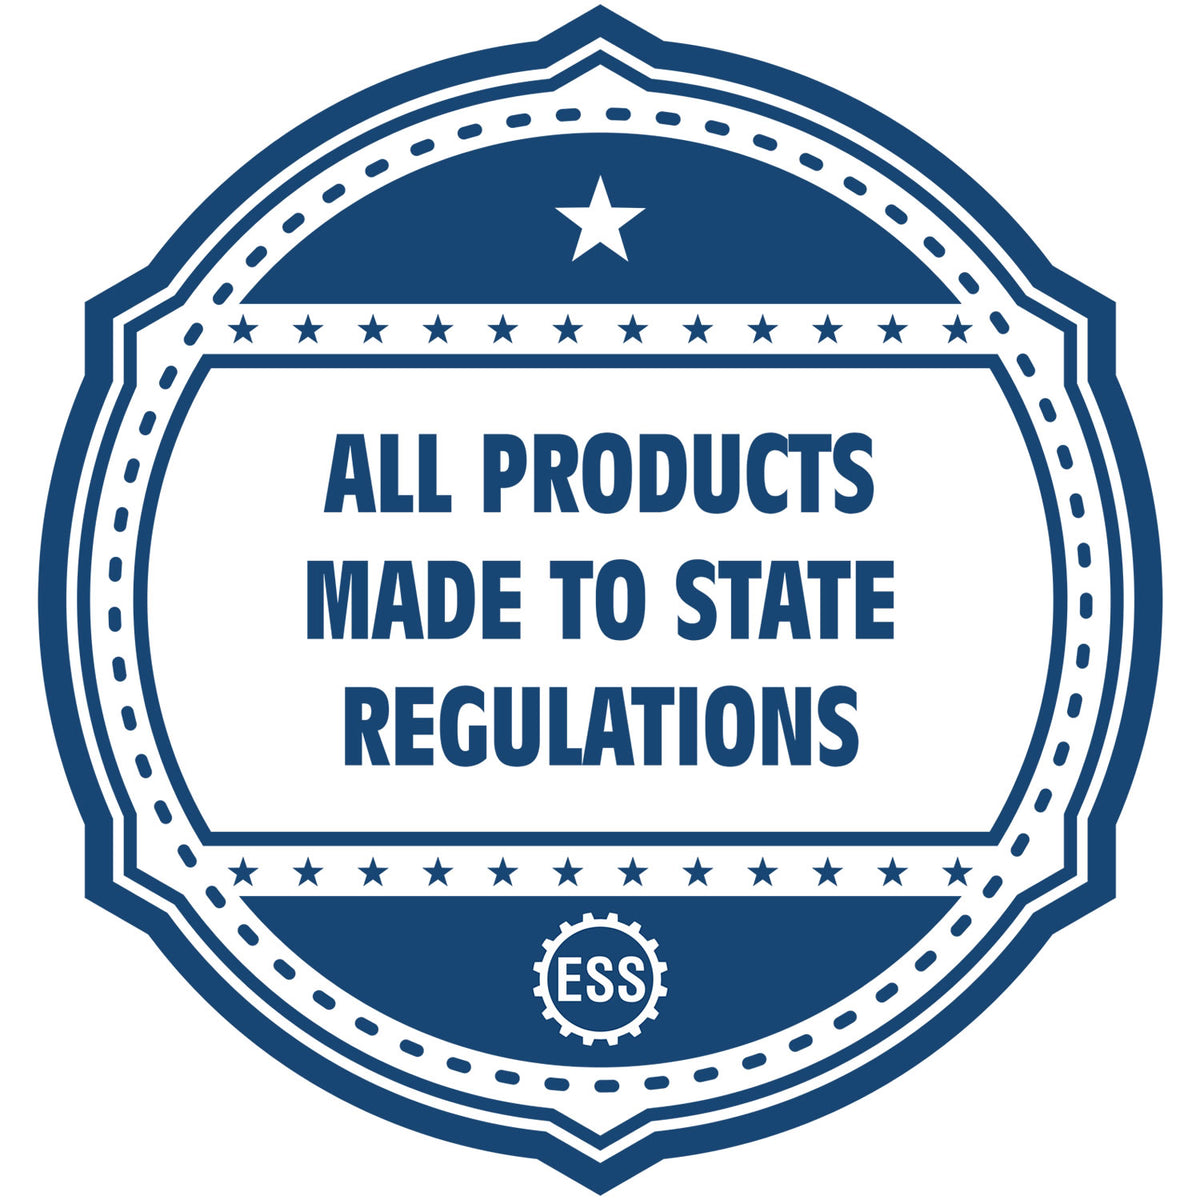 An icon or badge element for the State of Idaho Long Reach Architectural Embossing Seal showing that this product is made in compliance with state regulations.